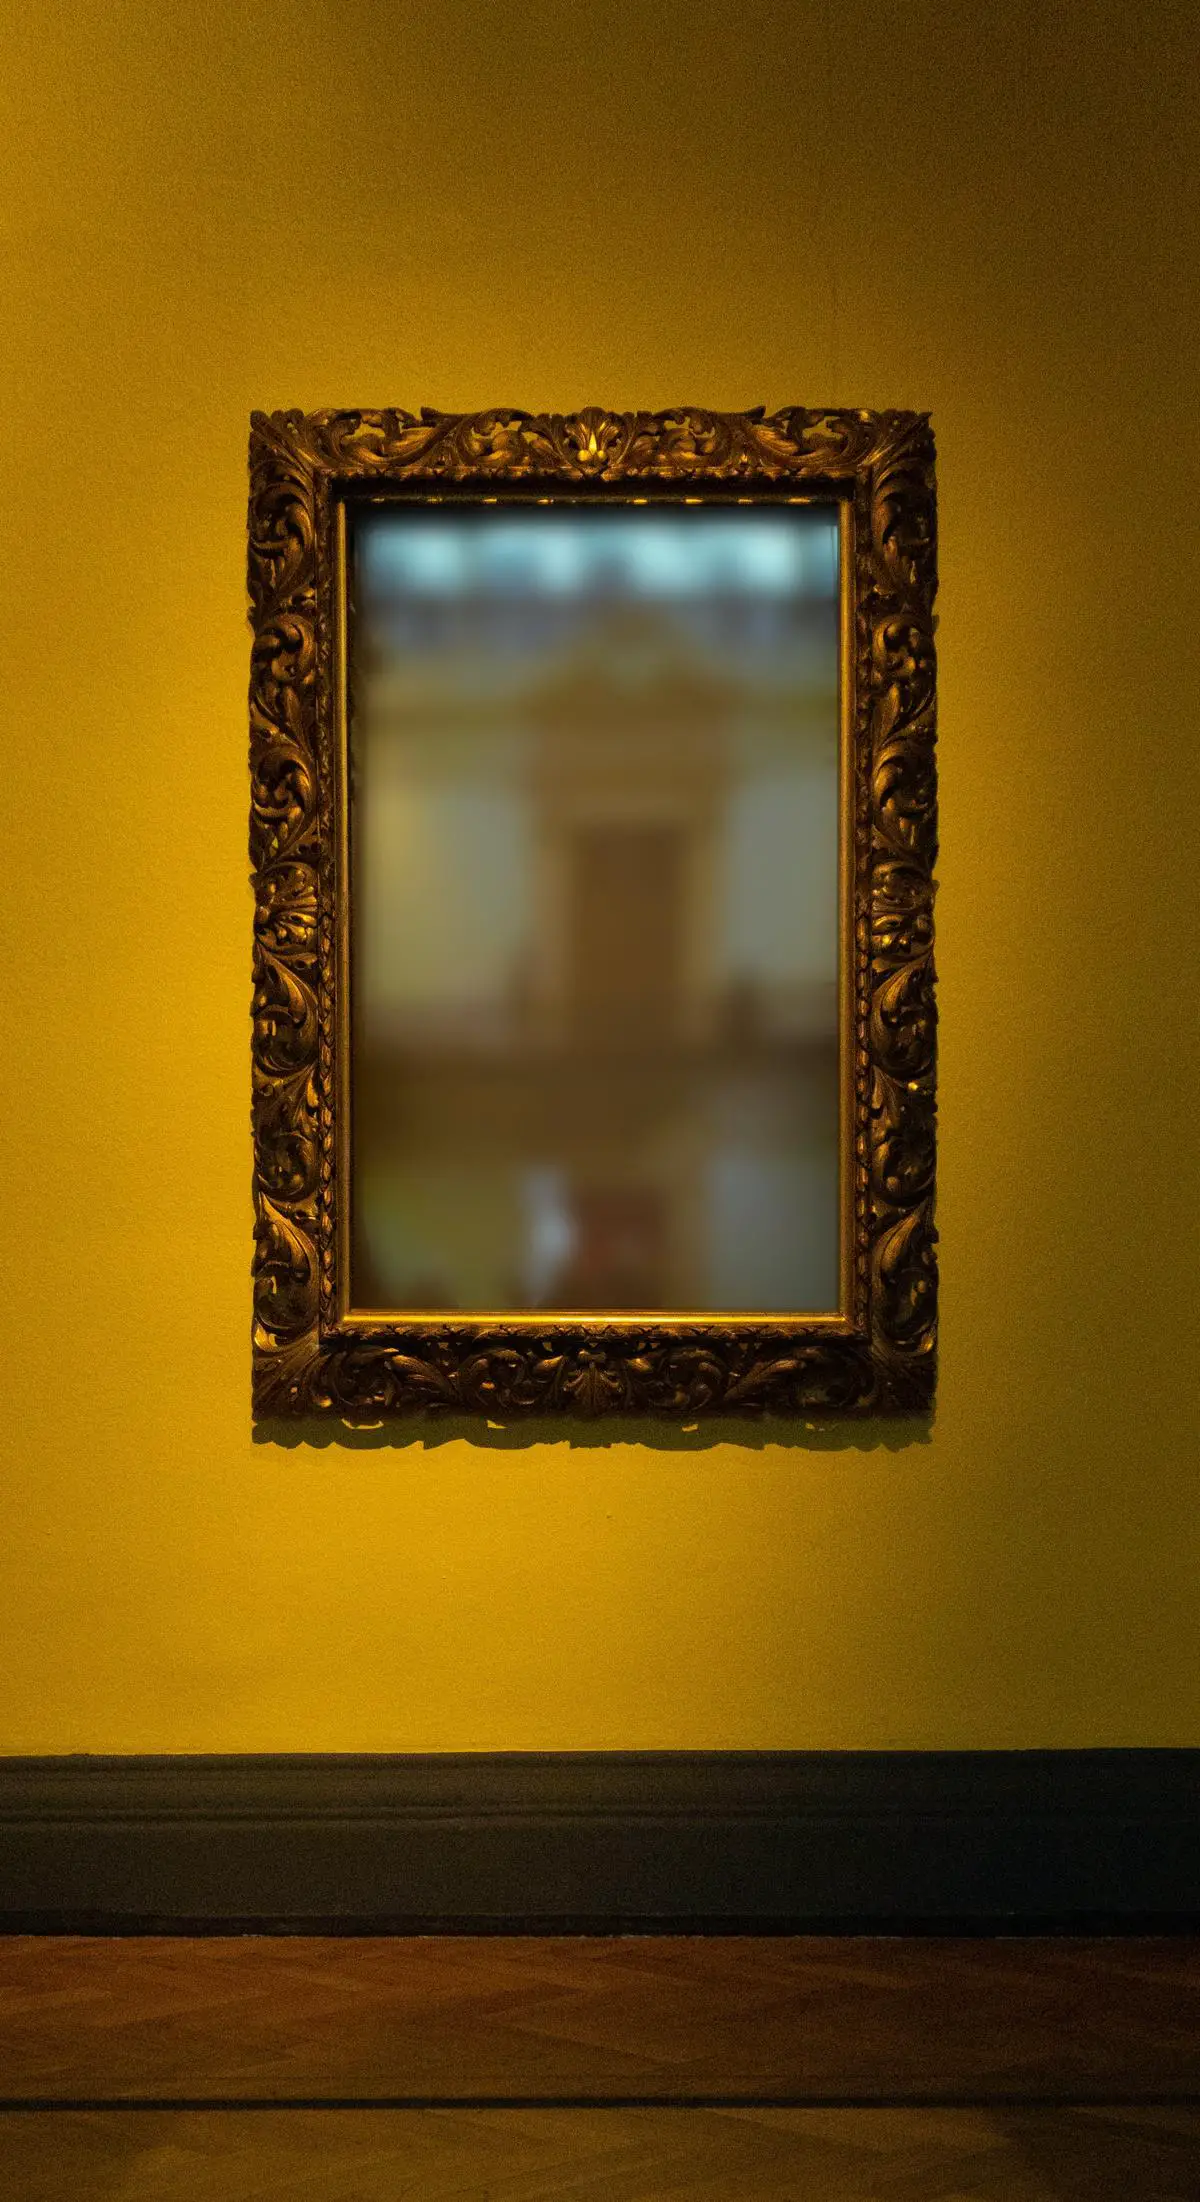 A DIY IKEA Hovet mirror frame made of wood and stained in a dark color sits against a white wall